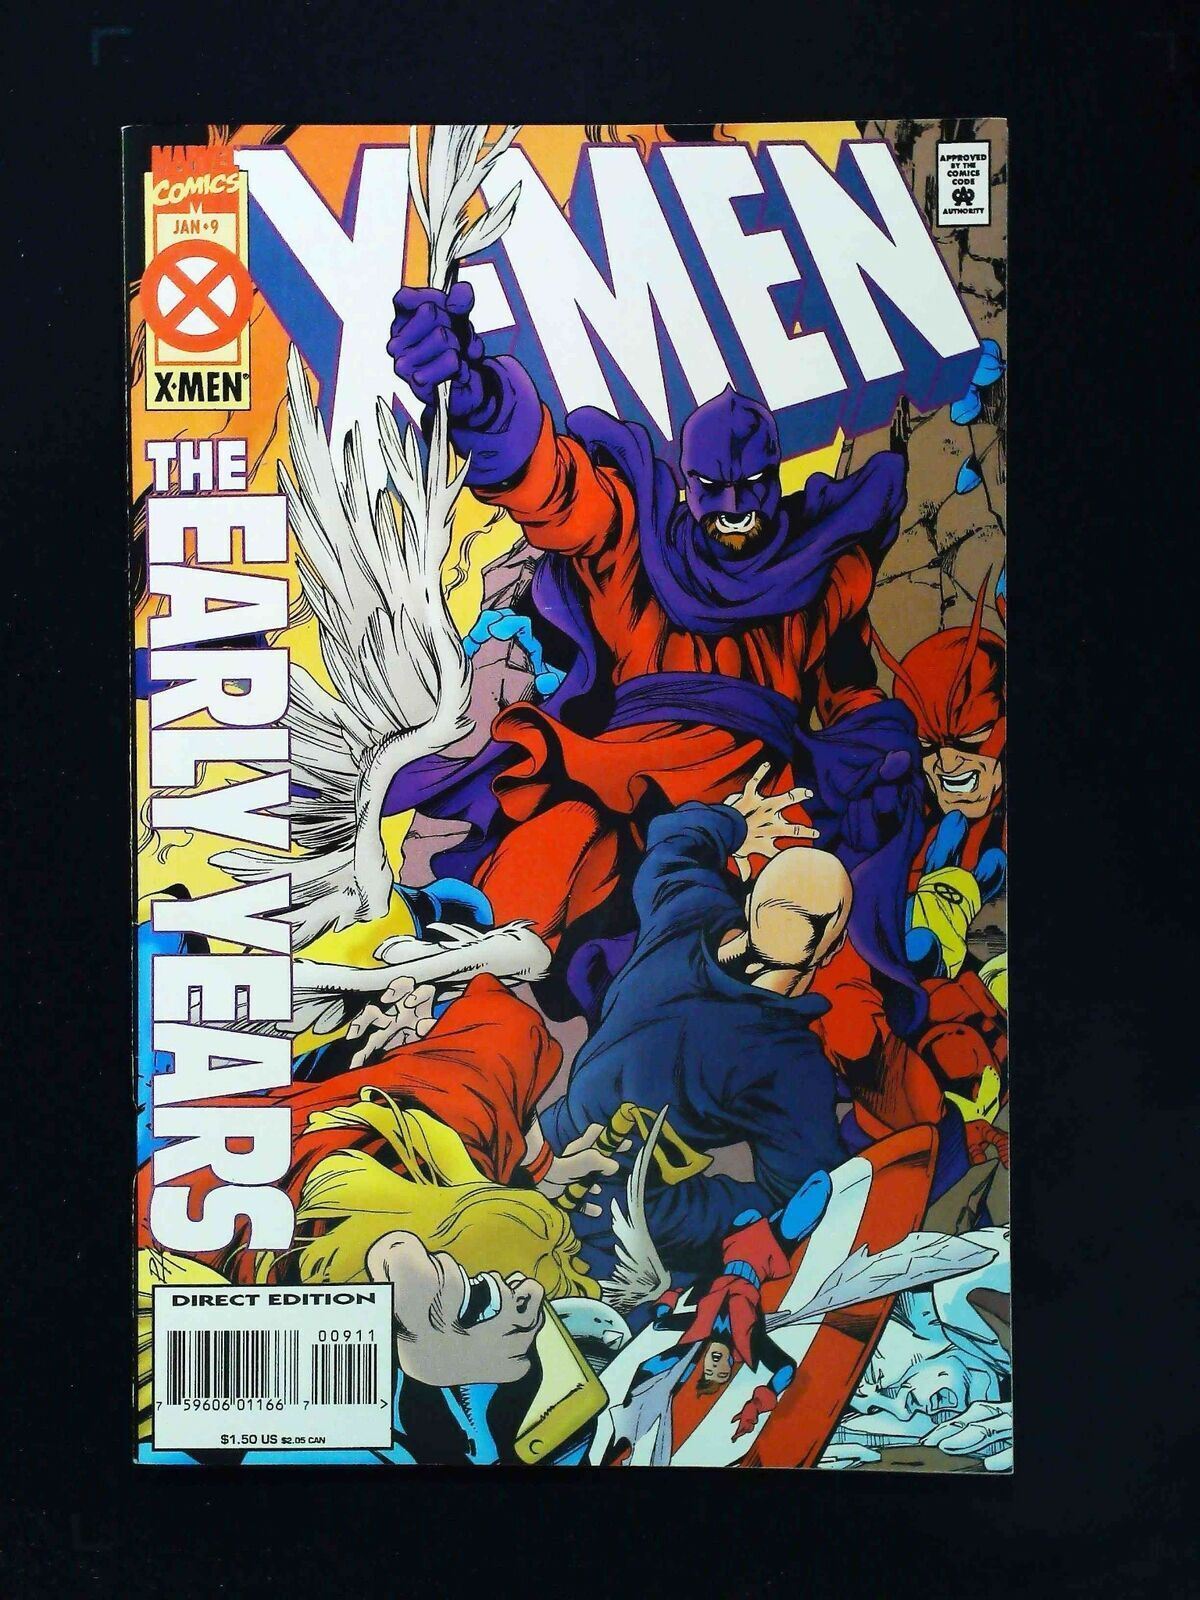 X-Men The Early Years #9  Marvel Comics 1995 Vf+  Variant Cover